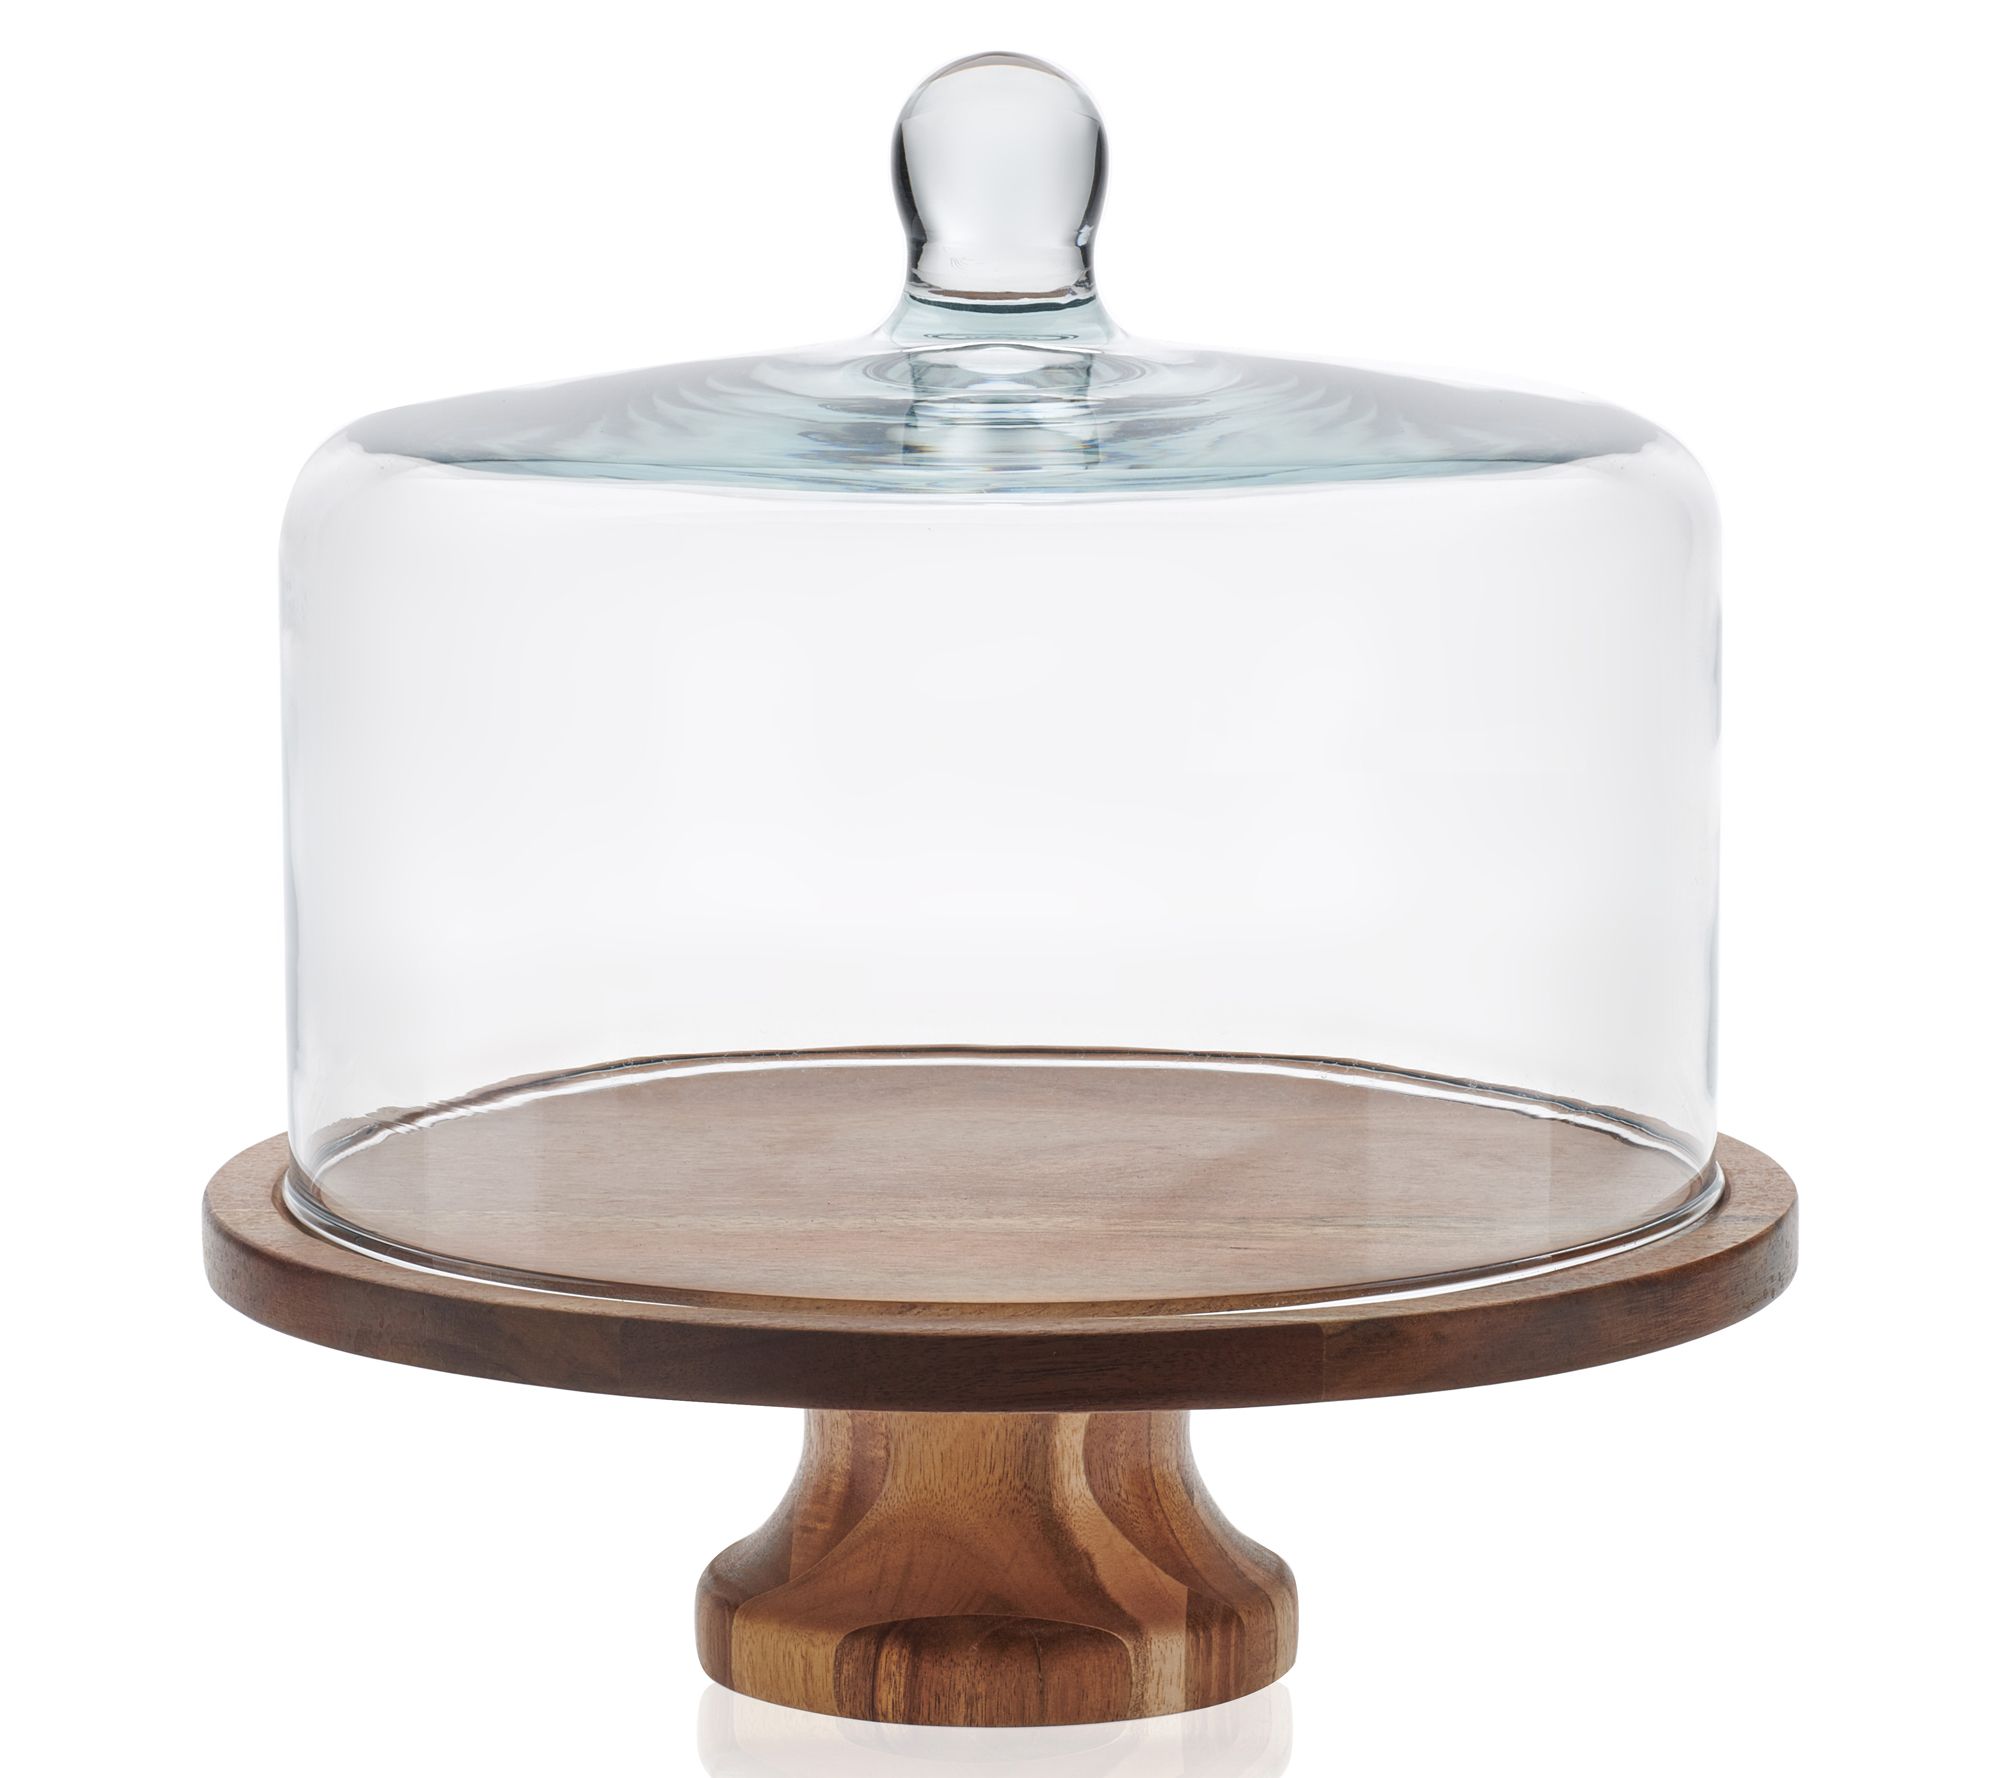 Libbey Acacia Wood Footed Cake Stand with GlassDome